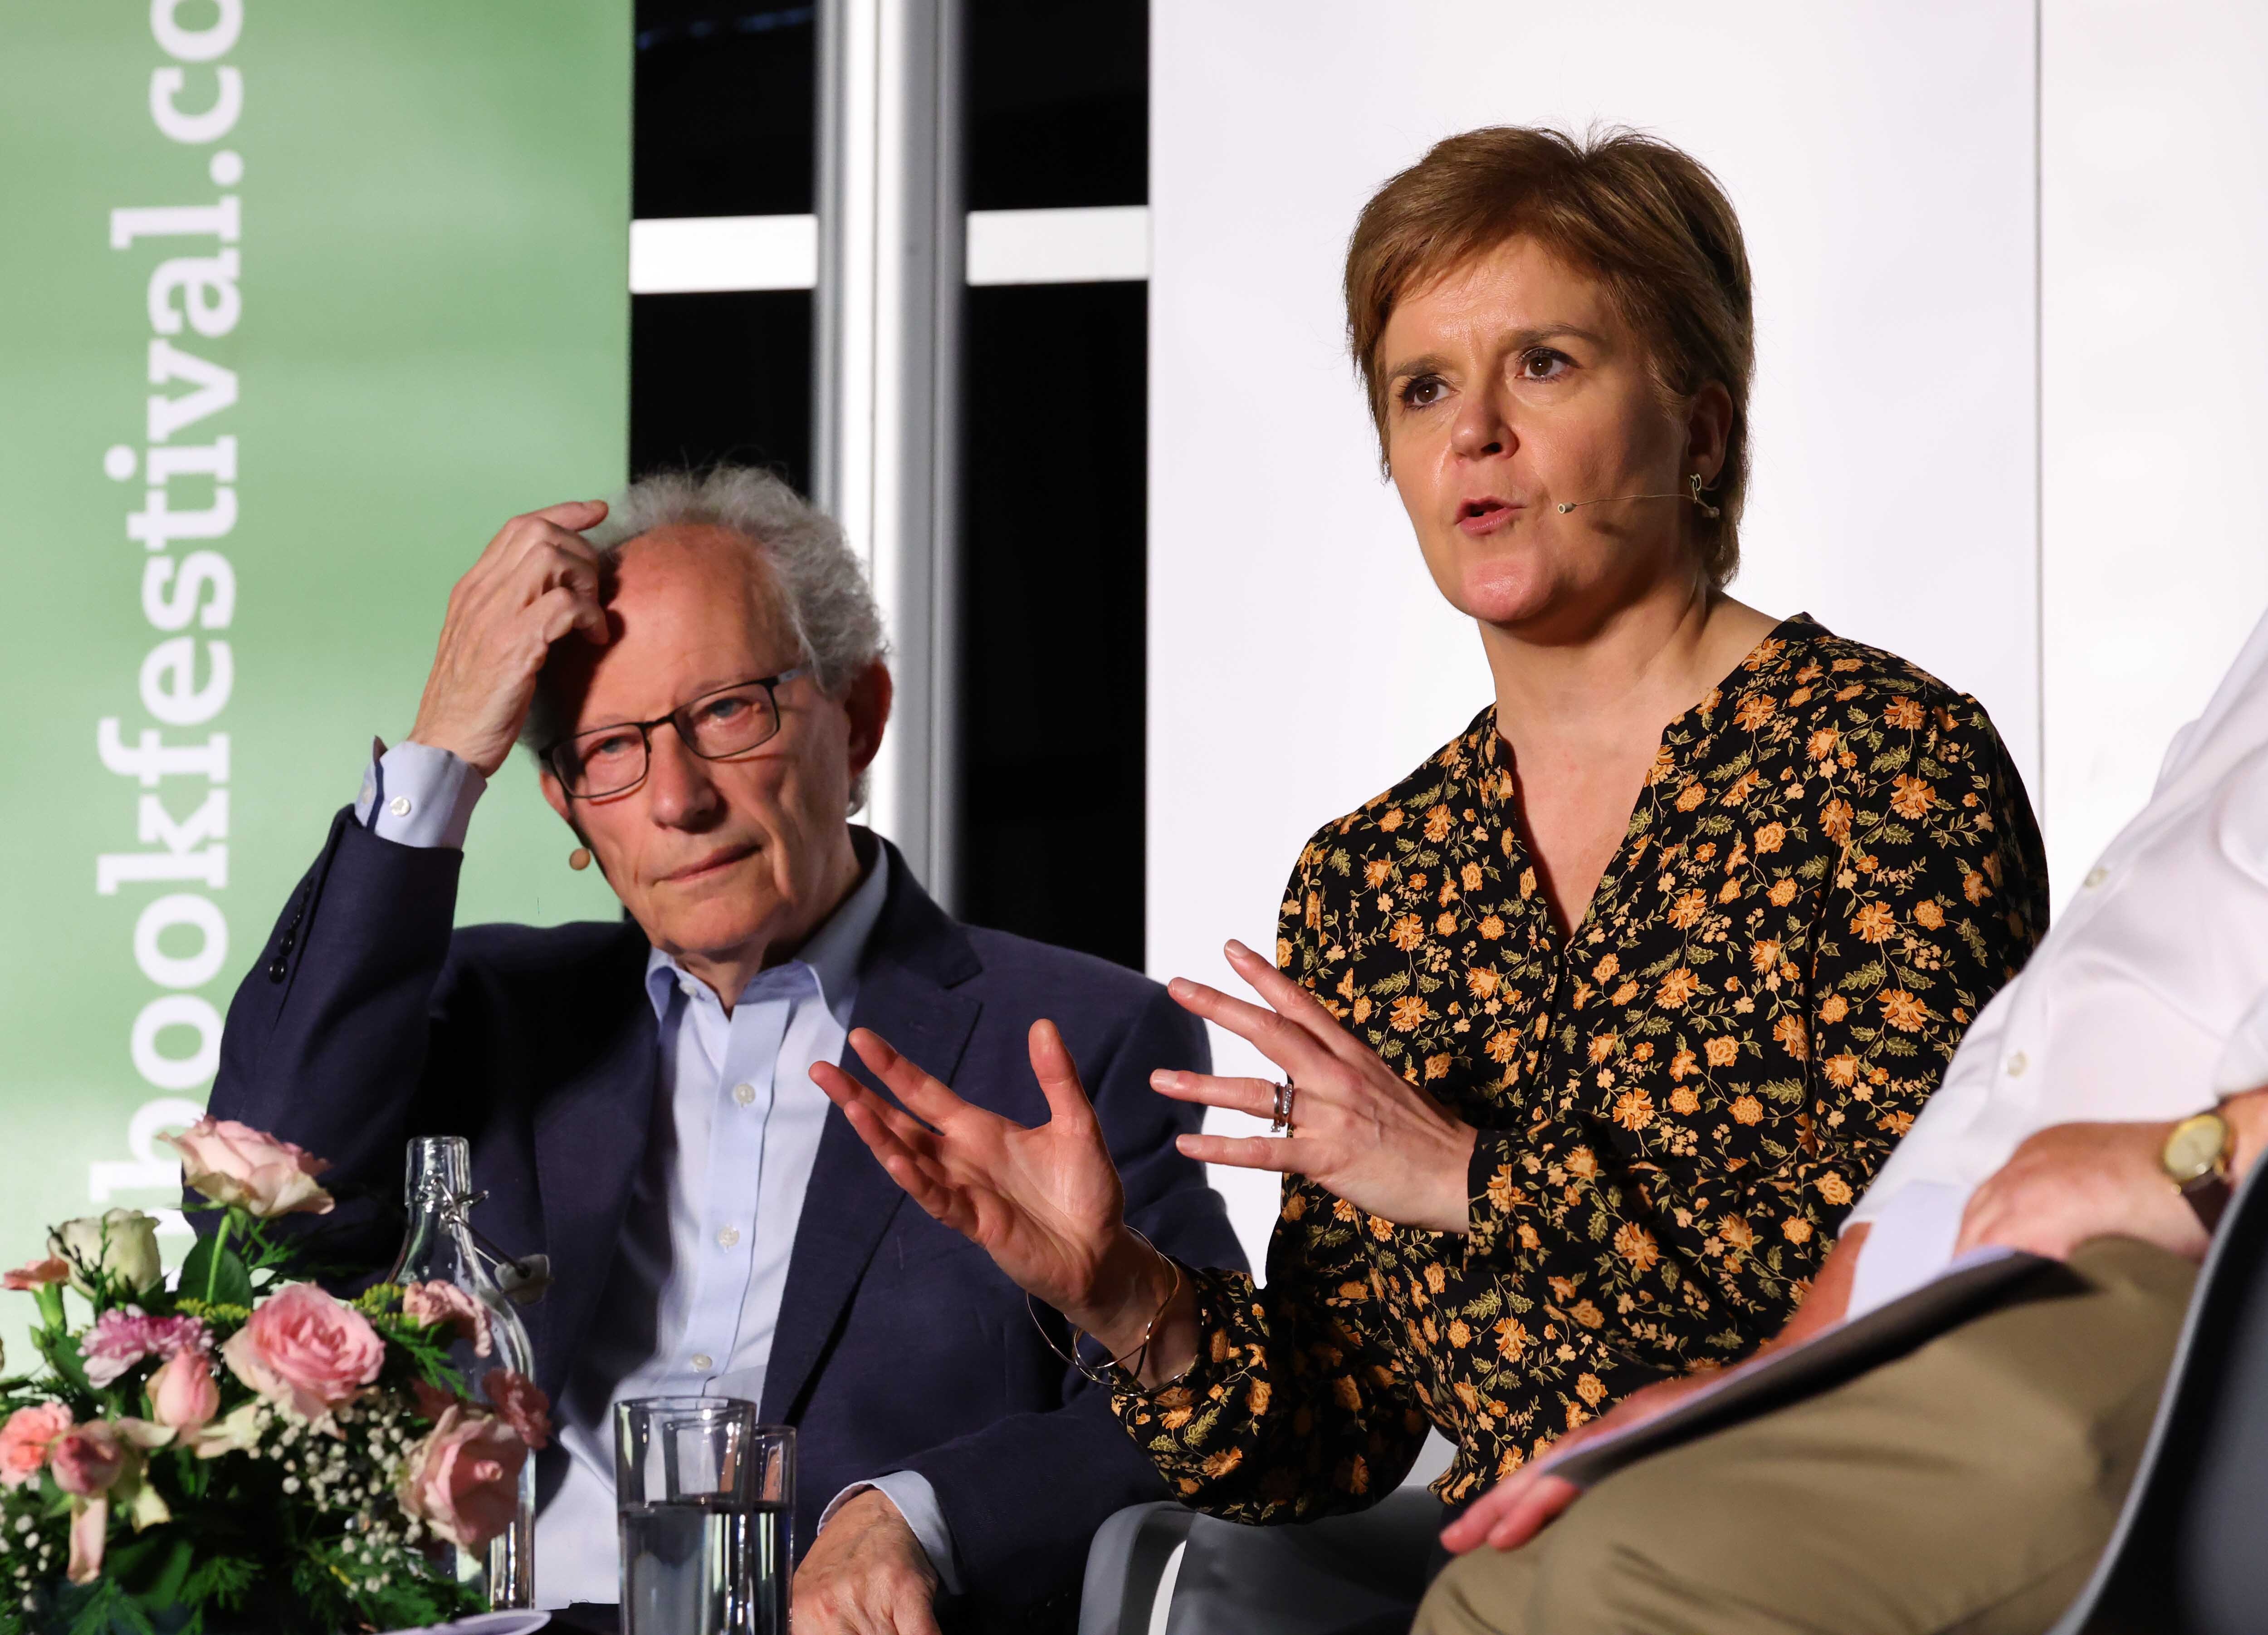 Henry McLeish and Nicola Sturgeon seated on stage at Wigtown Book Festival. McLeish scratches his head, Sturgeon gestures with her hands while speaking.